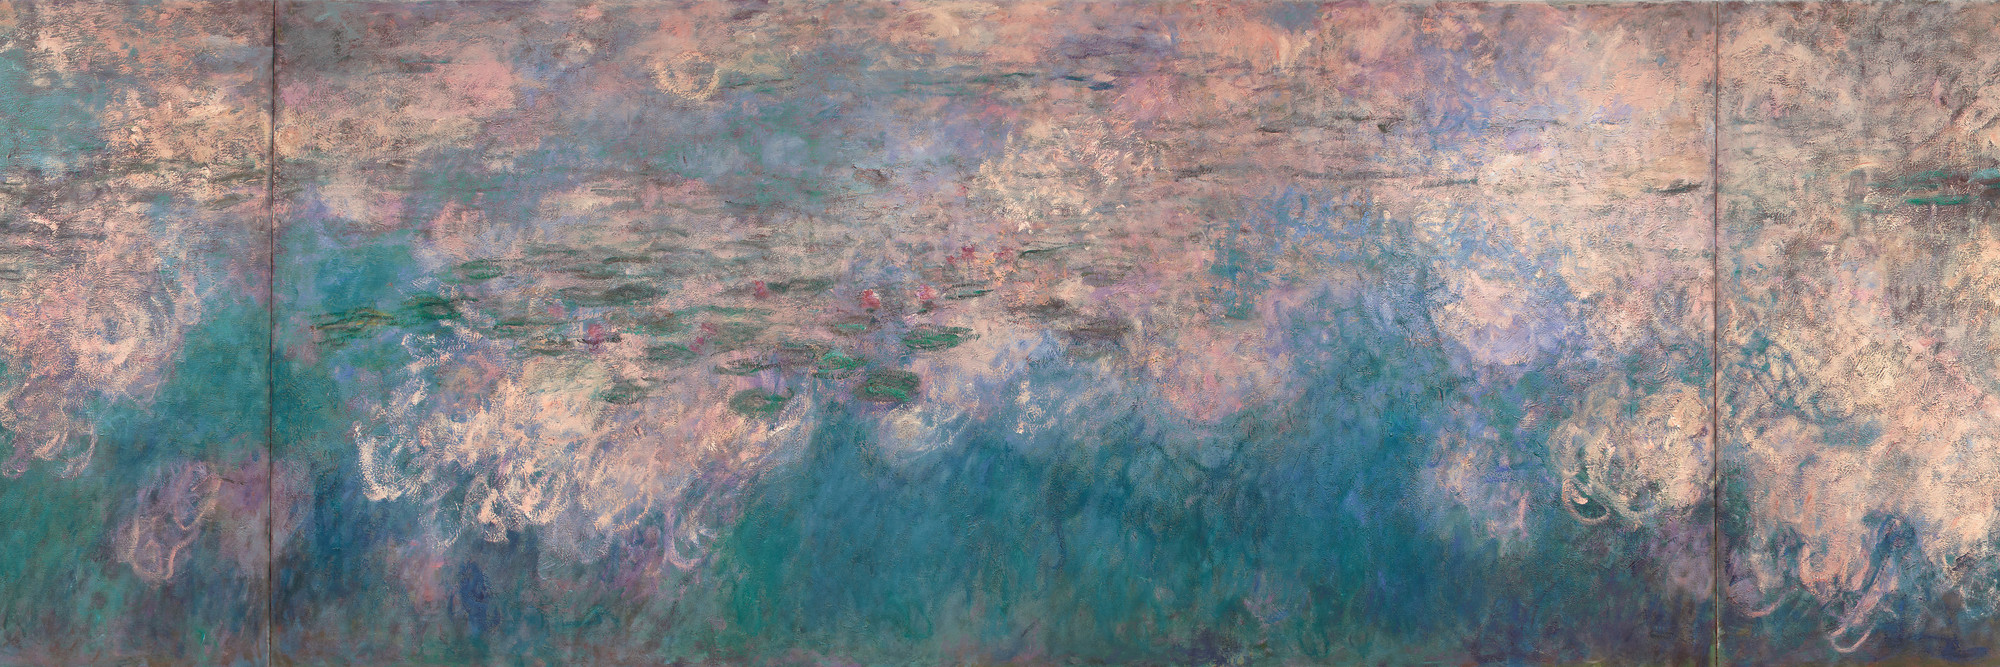 Claude Monet. Water Lilies. 1914–26. Oil on canvas, three panels, each 6&#39; 6 3/4&#34; × 13&#39; 11 1/4&#34; (200 × 424.8 cm), overall 6&#39; 6 3/4&#34; × 41&#39; 10 3/8&#34; (200 × 1276 cm). Mrs. Simon Guggenheim Fund